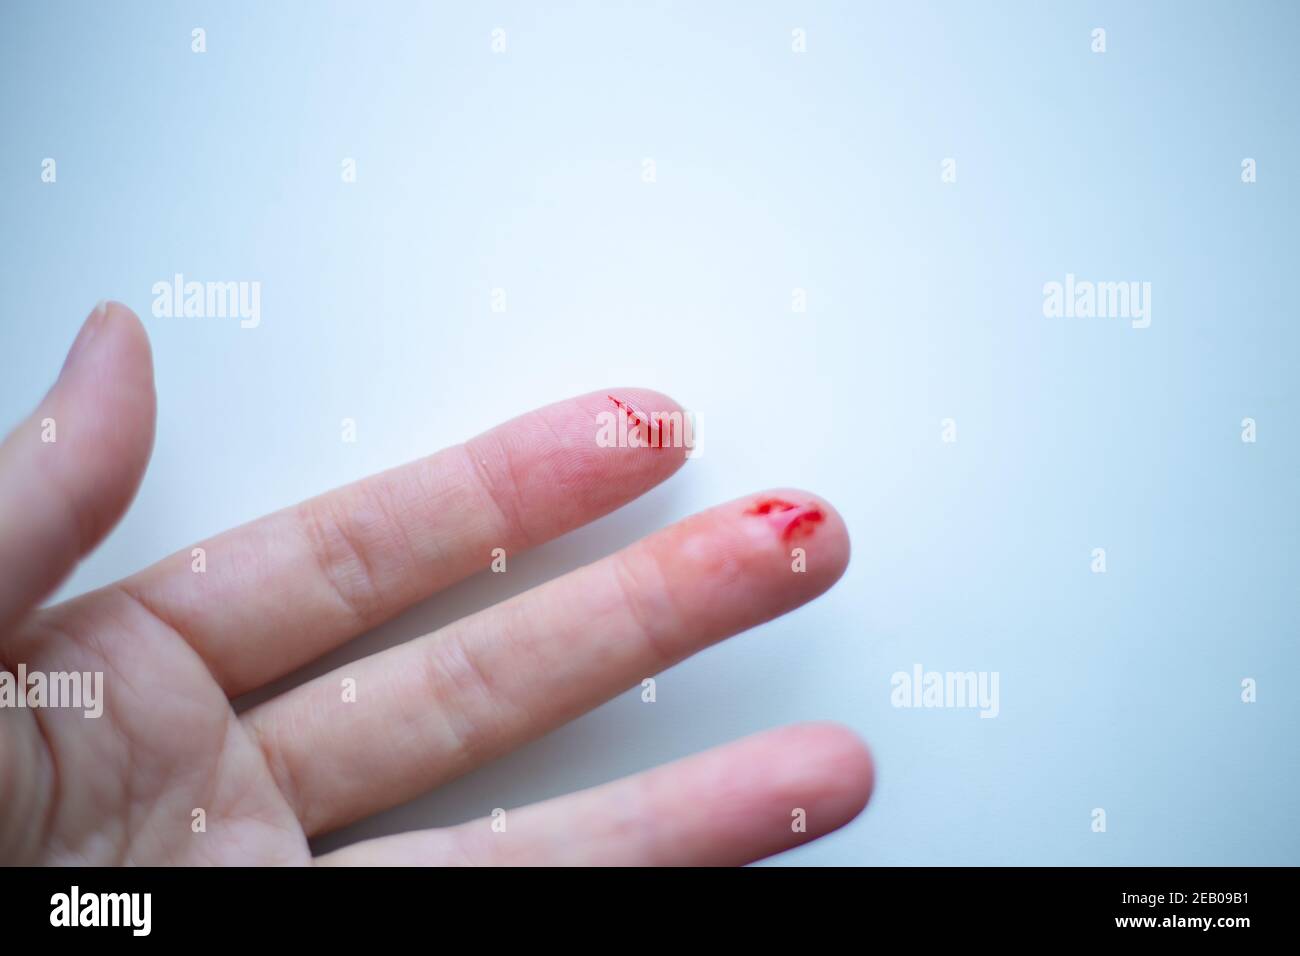 finger on his left hand is cut and bleeds with bright red blood on a light background Stock Photo